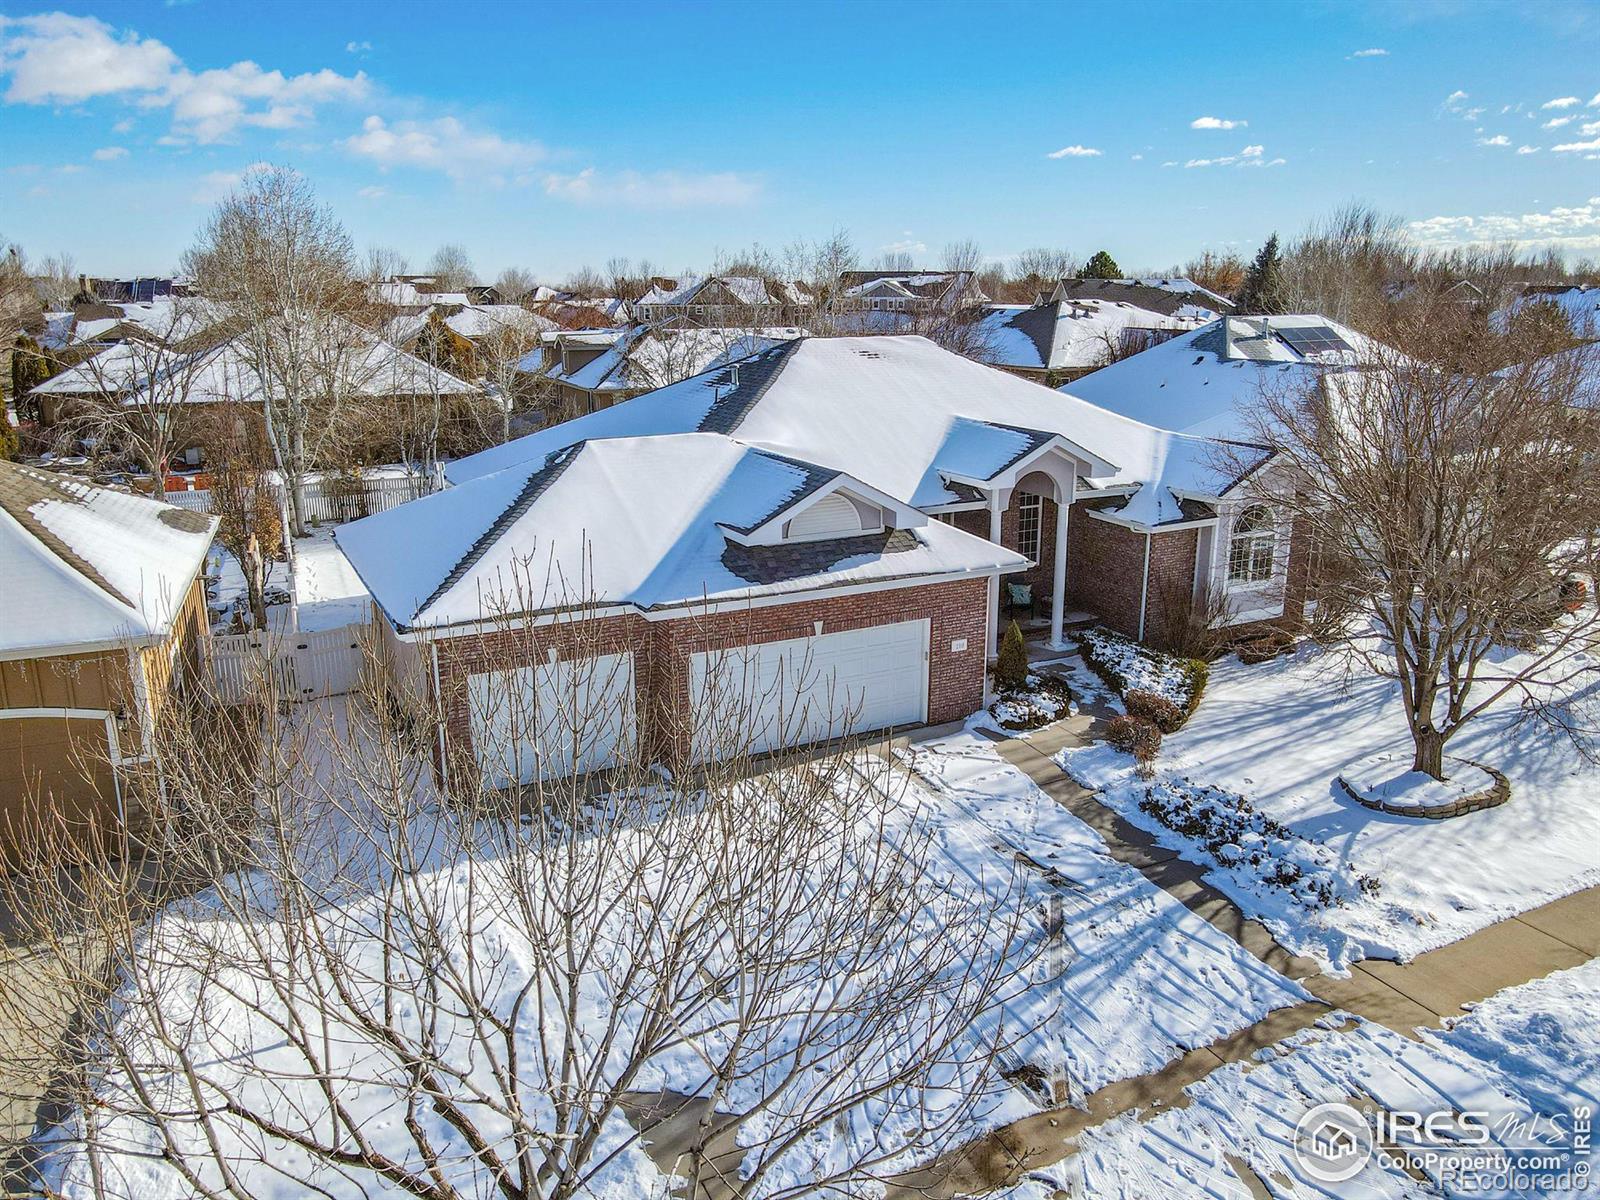 CMA Image for 210 n 53rd ave ct,Greeley, Colorado